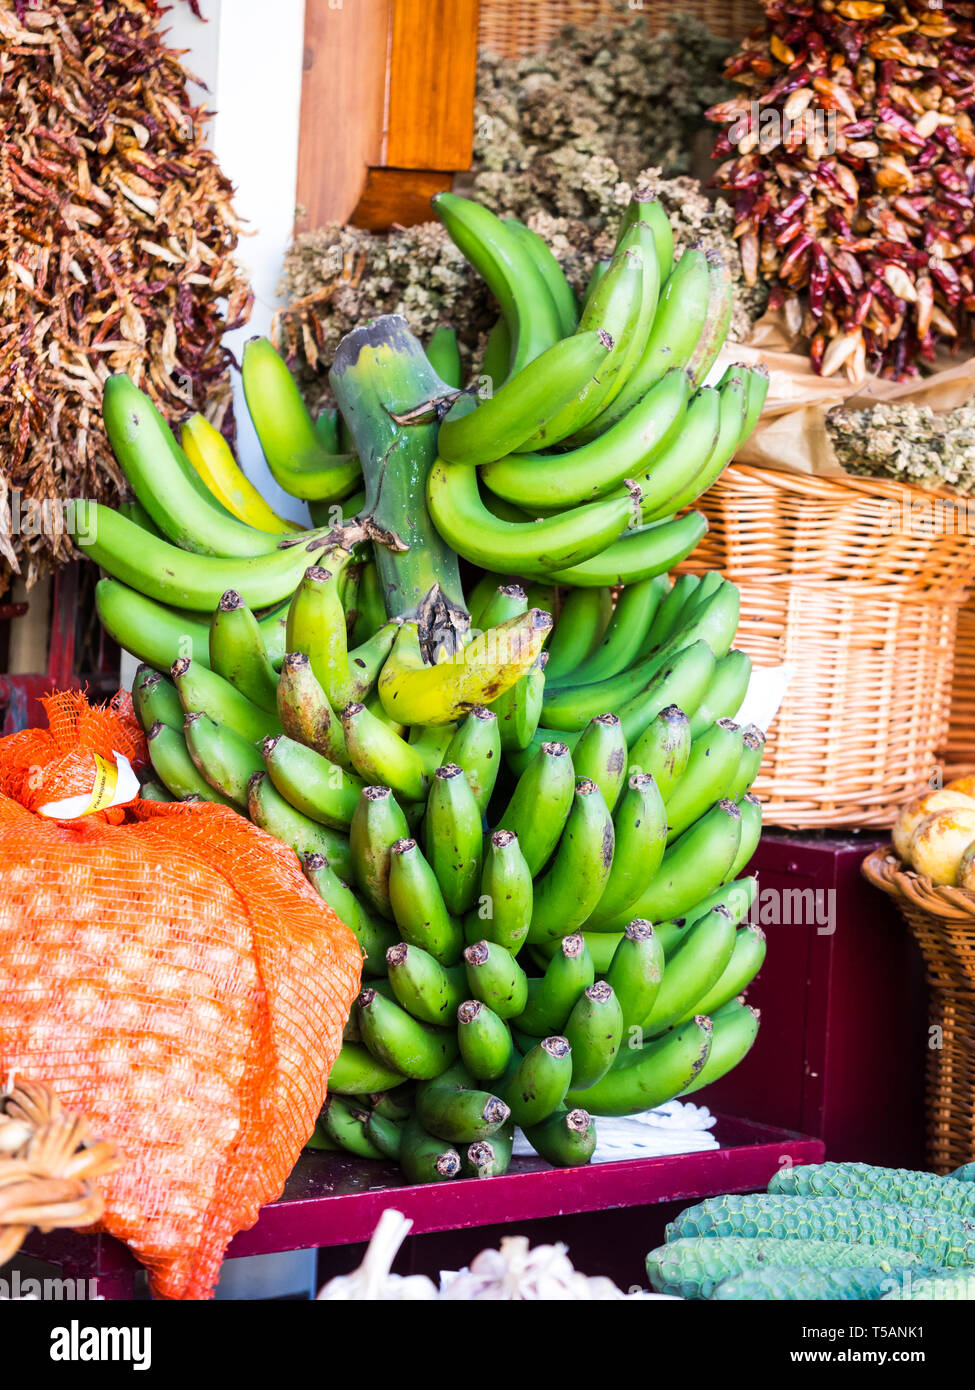 Bananas from Madeira sold on a local market in Funchal, Madeira, Portugal. Stock Photo